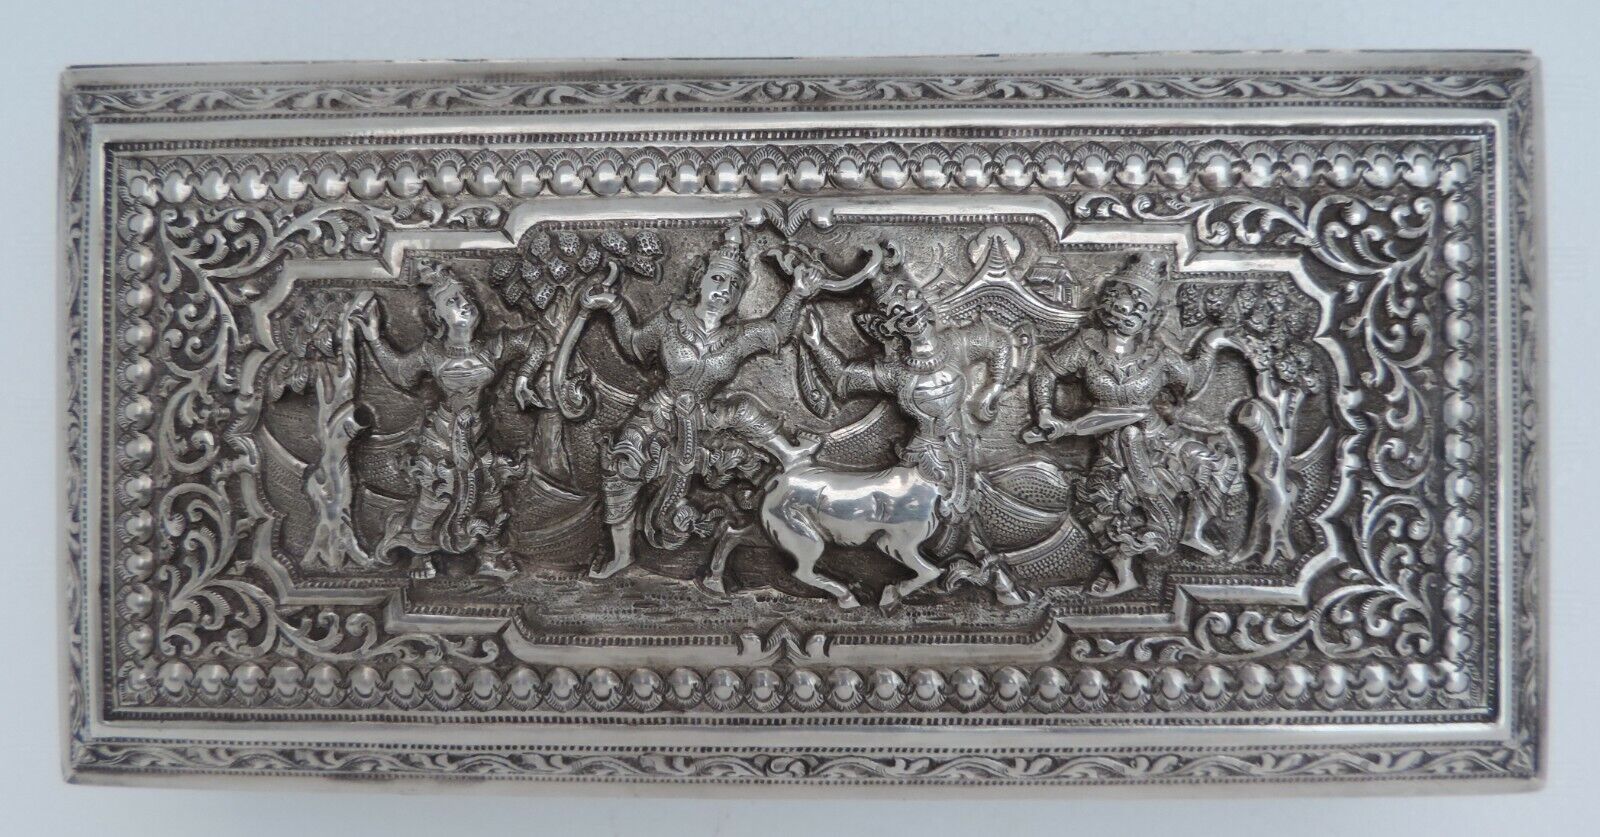 VERY Max 43% OFF FINE ANTIQUE 19TH C BURMESE Max 78% OFF SOLID CRA HAND MASTERLY SILVER